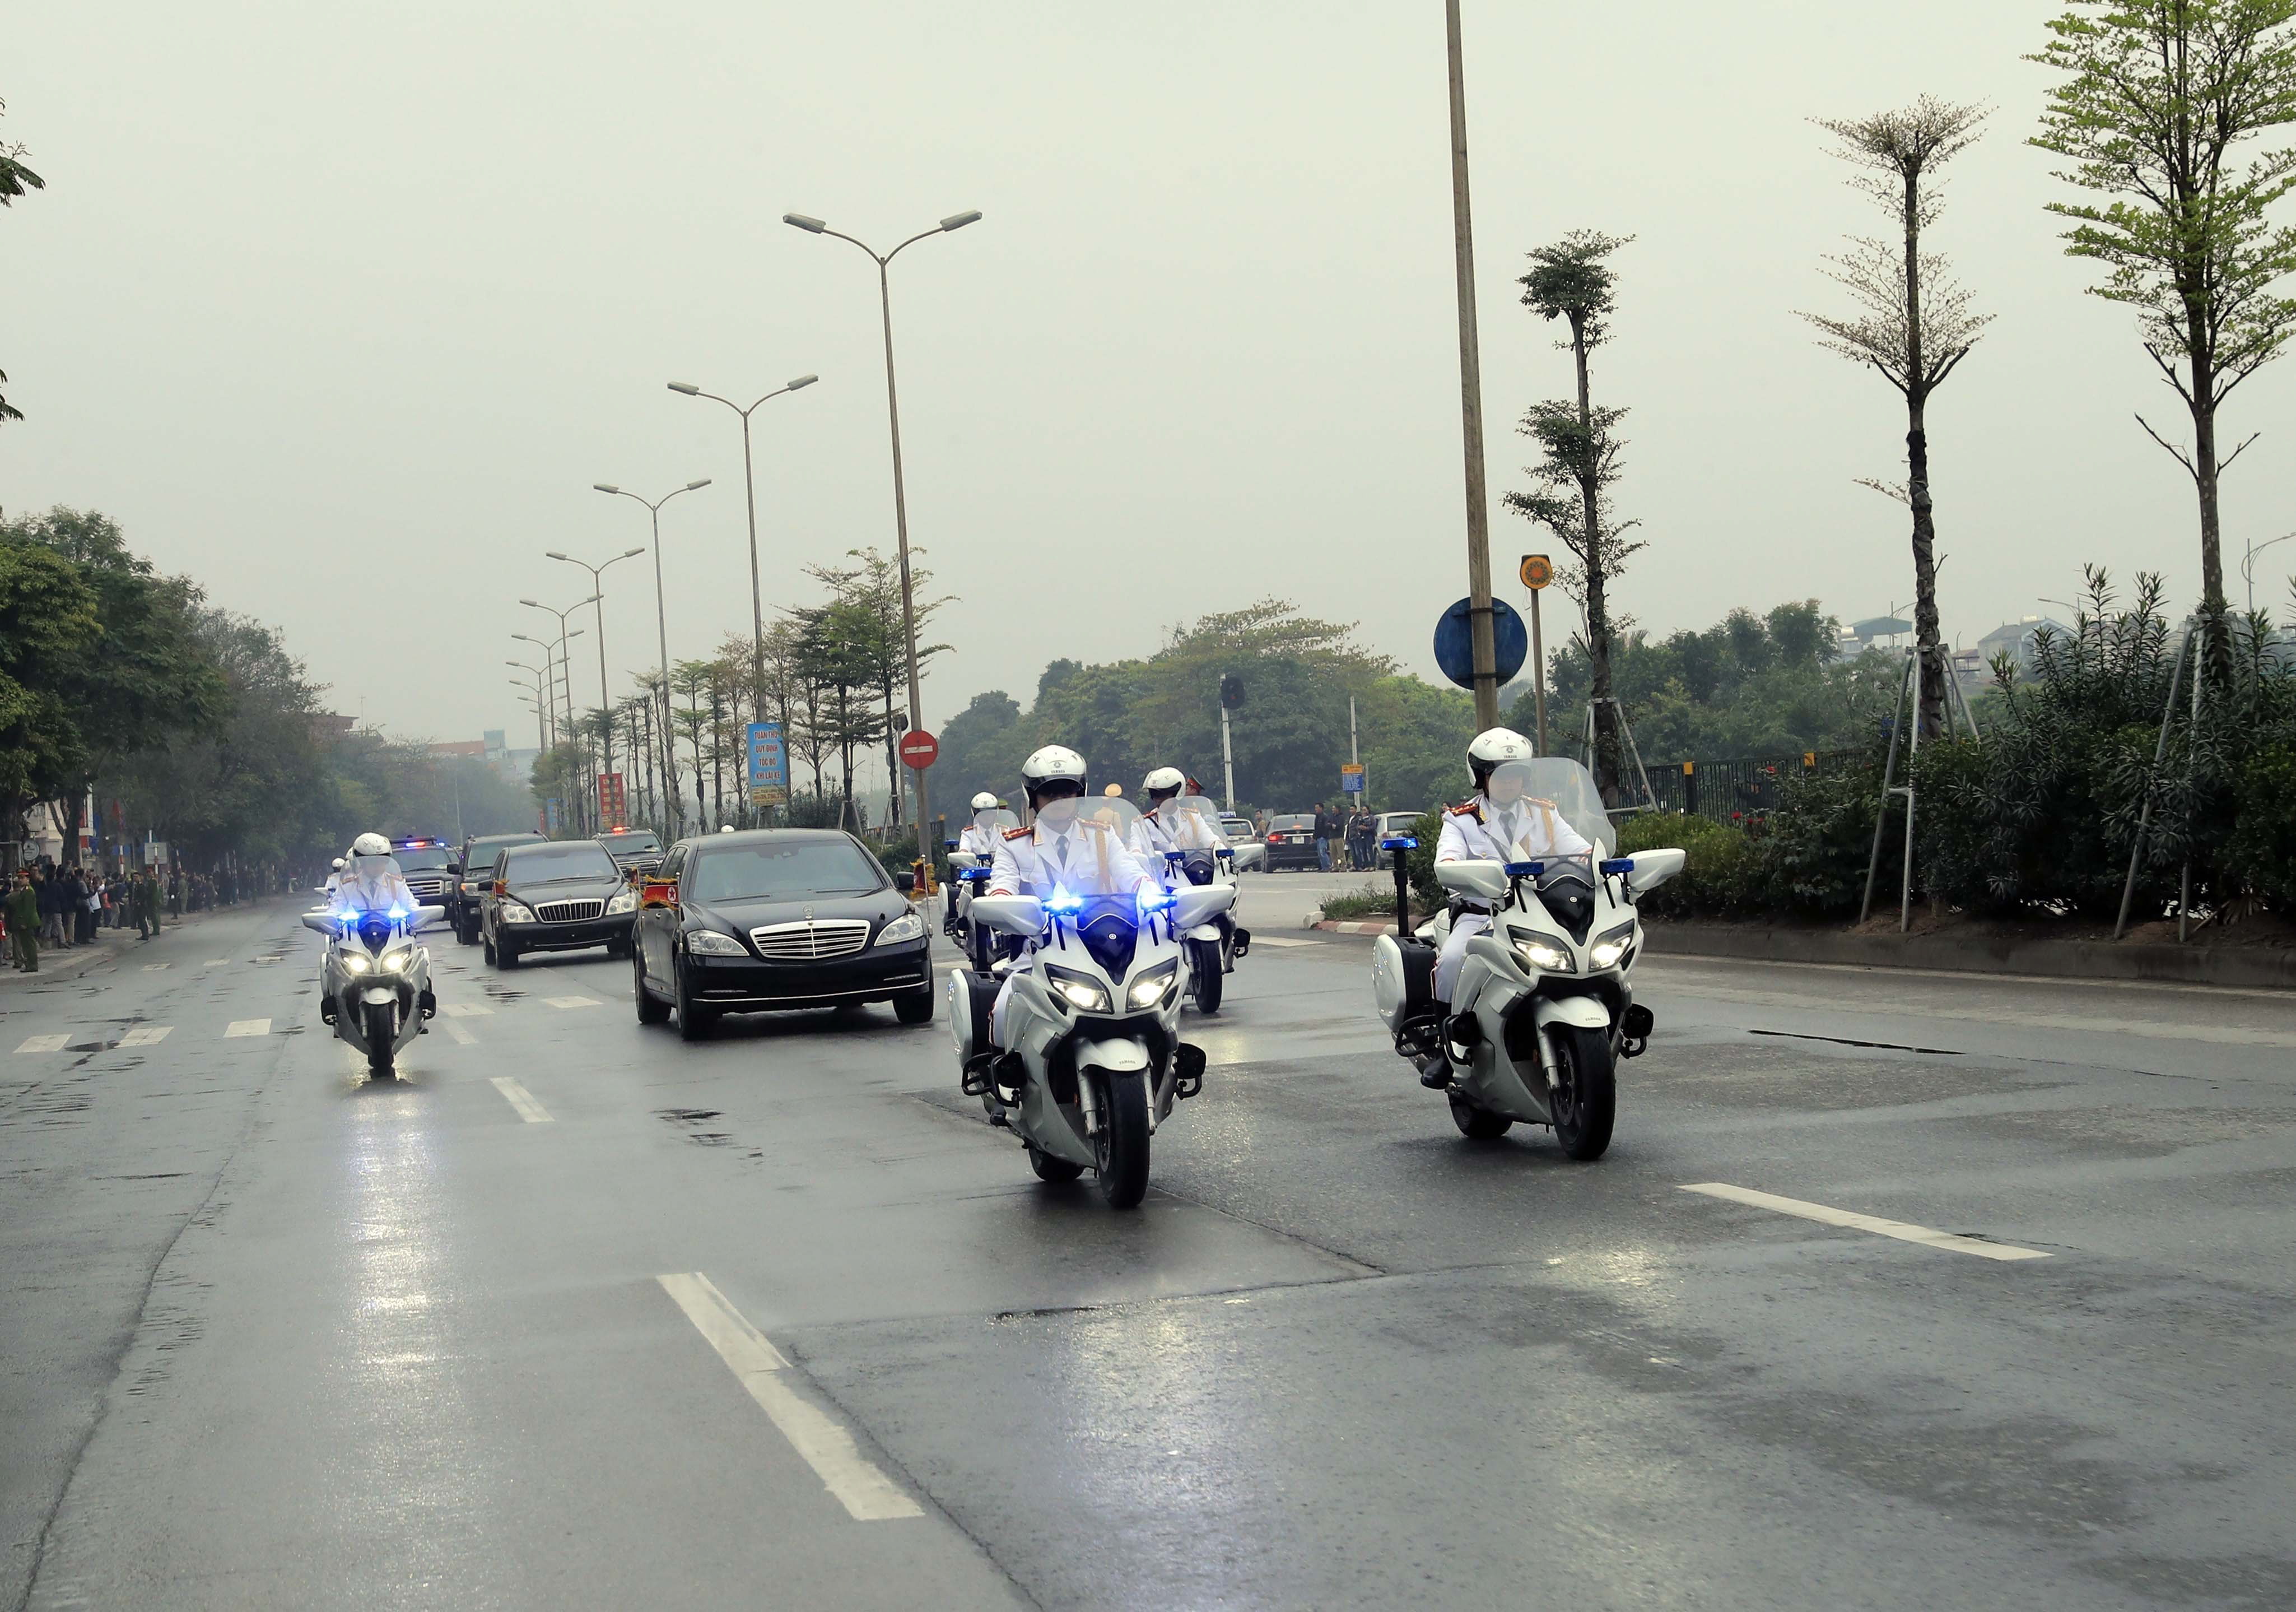 epa07397987 A motorcade with Korean leader Kim Jong-un travels from Dong Dang to Hanoi ahead of the US-North Korea summit hosted in Hanoi, Vietnam, 26 February 2019. The second meeting of the US President and the North Korean leader, running from 27 to 28 February 2019, focuses on furthering steps towards achieving peace and complete denuclearization of the Korean peninsula.  EPA/STR VIETNAM OUT  EDITORIAL USE ONLY